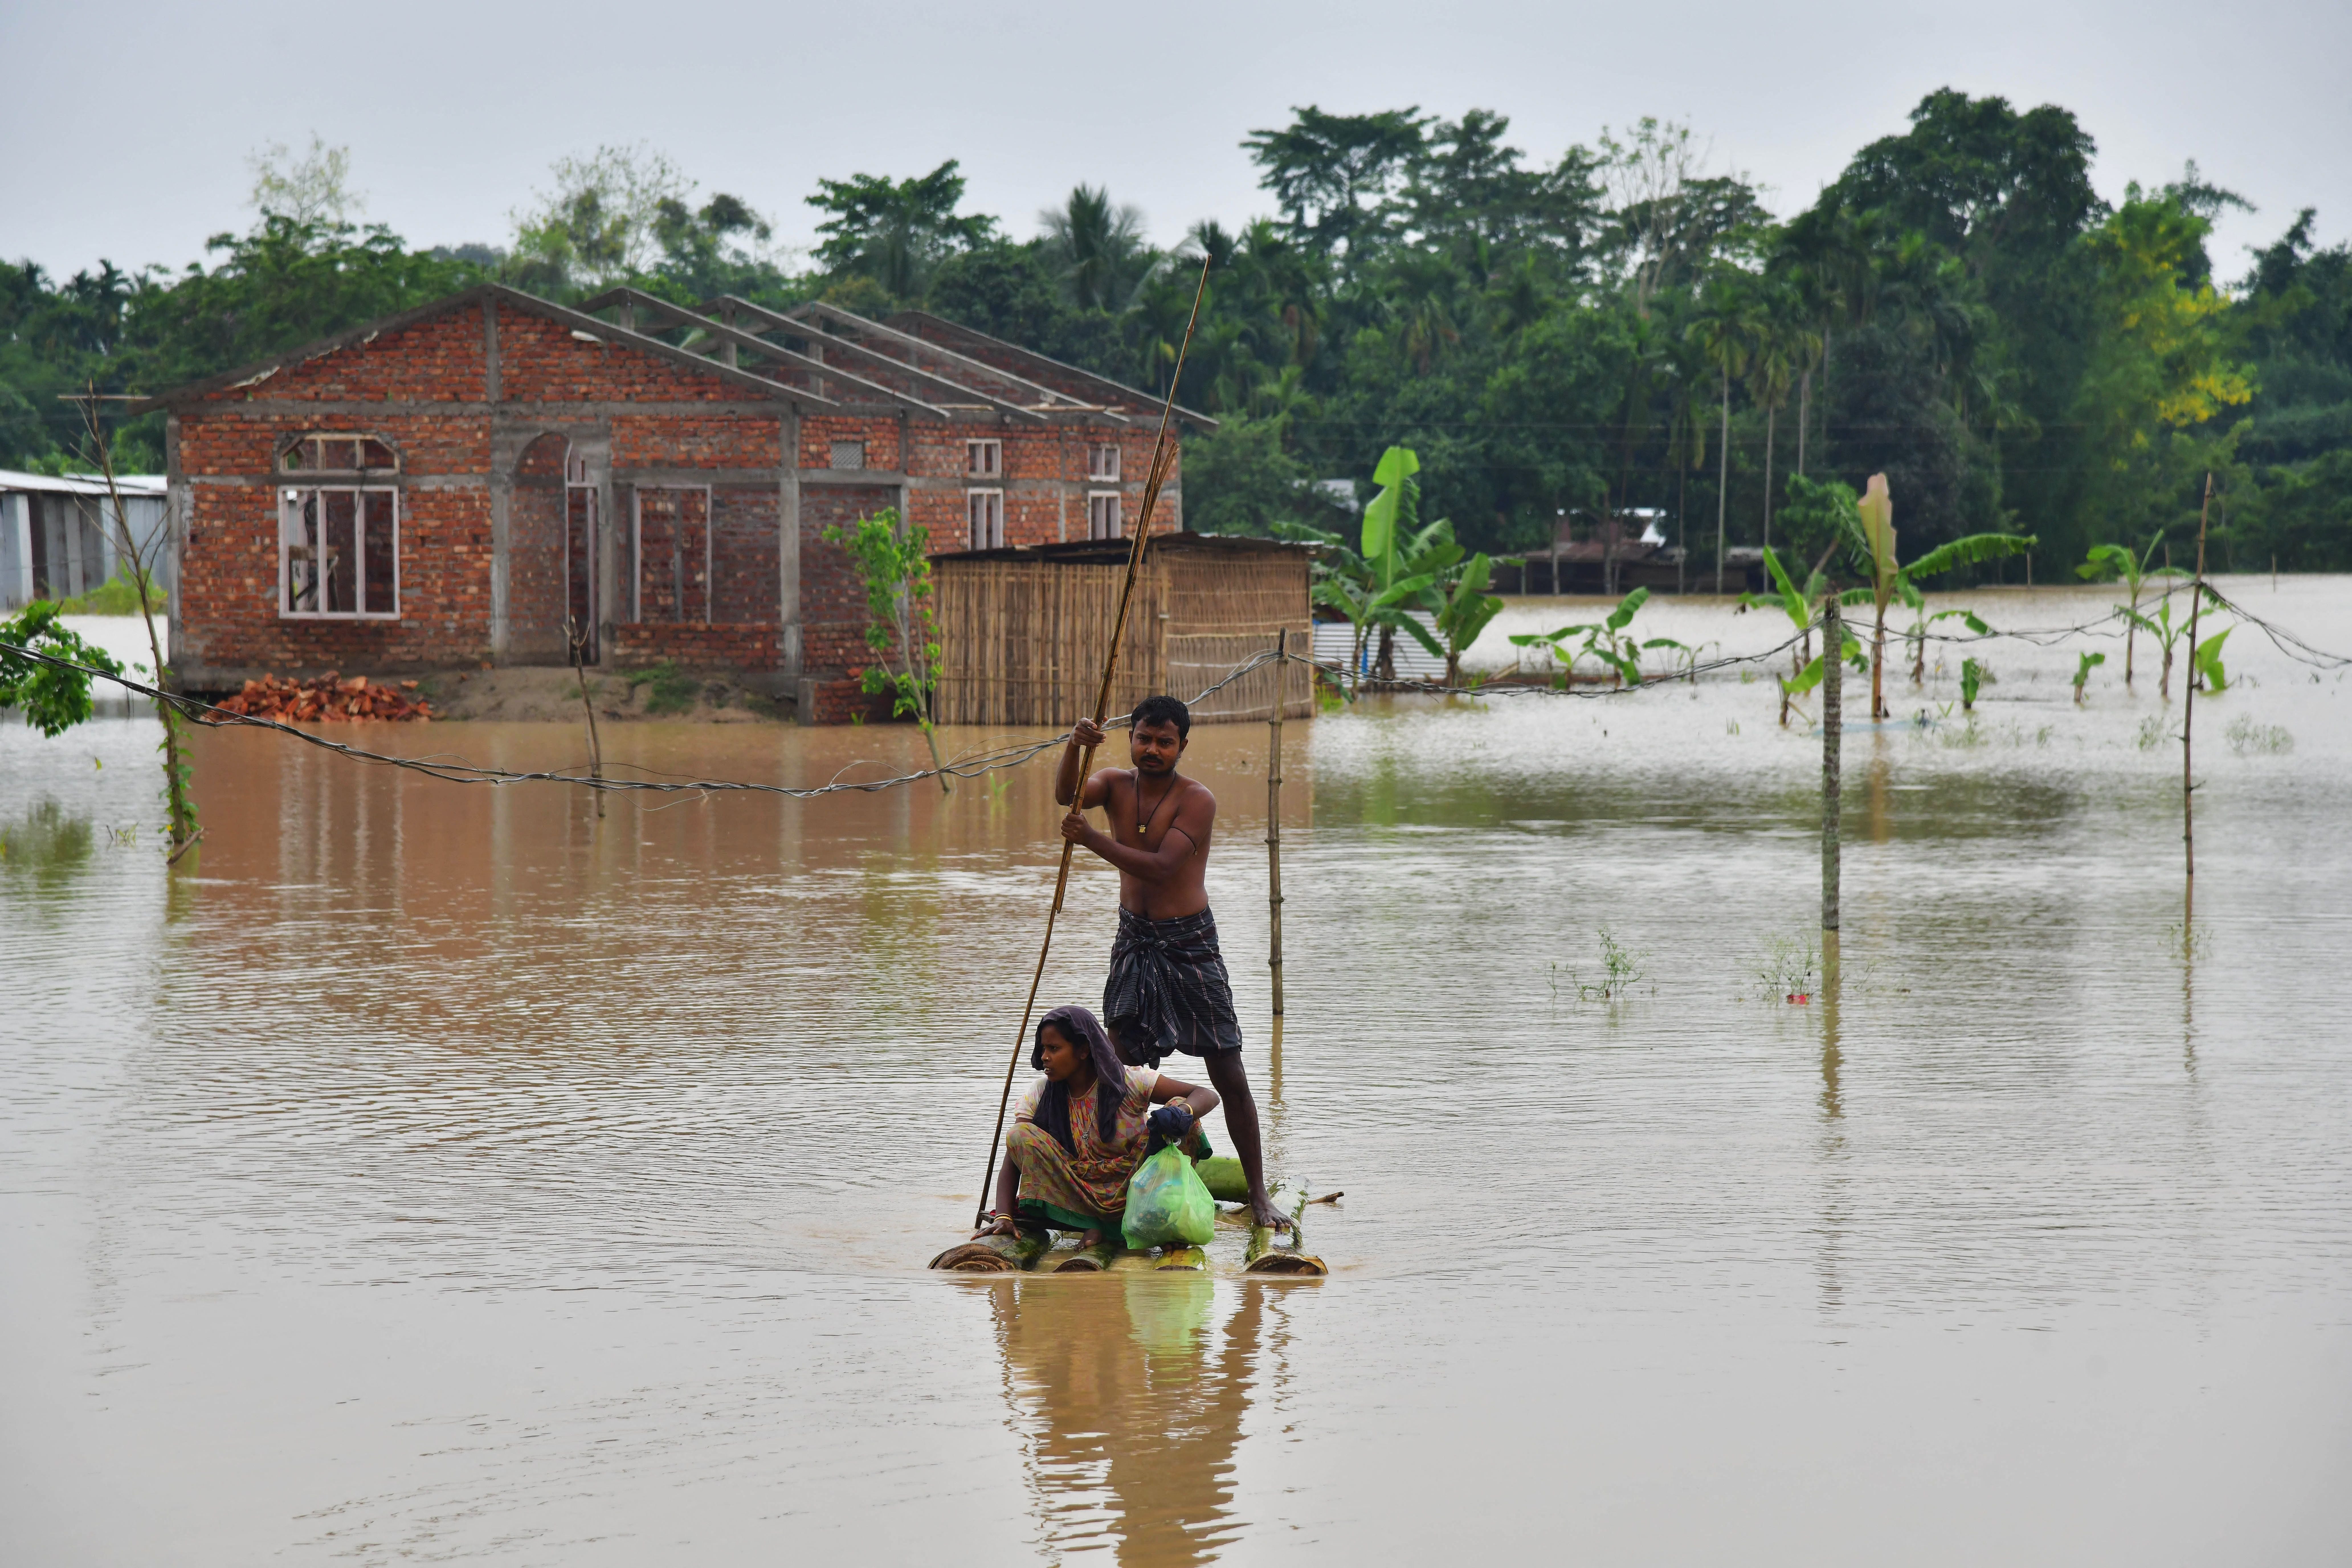 Villagers on a raft make their way past homes in a flooded area after heavy rains in Nagaon district, Assam state, on 21 May